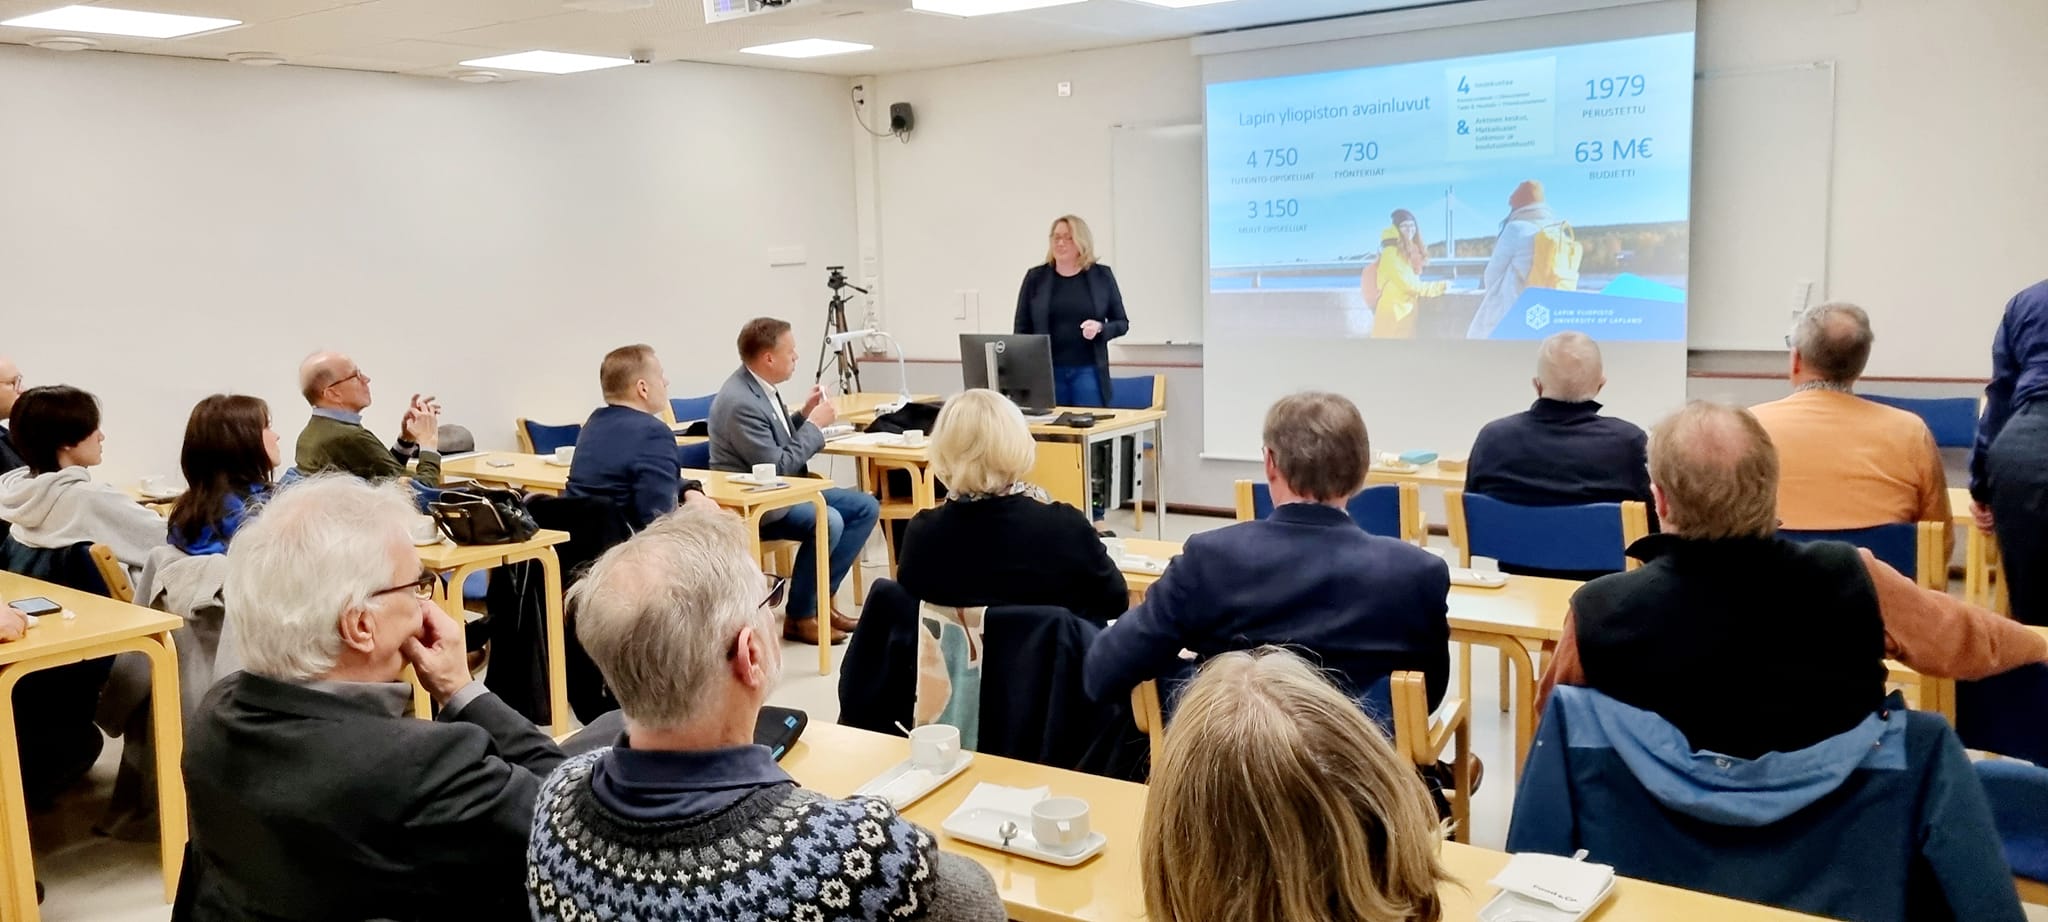 Satu Uusiautti, vice rector of education at the University of Lapland, performing at the joint community visit of Rovaniemi Rotary Club and Rovaniemi Santa Claus Rotary Club.